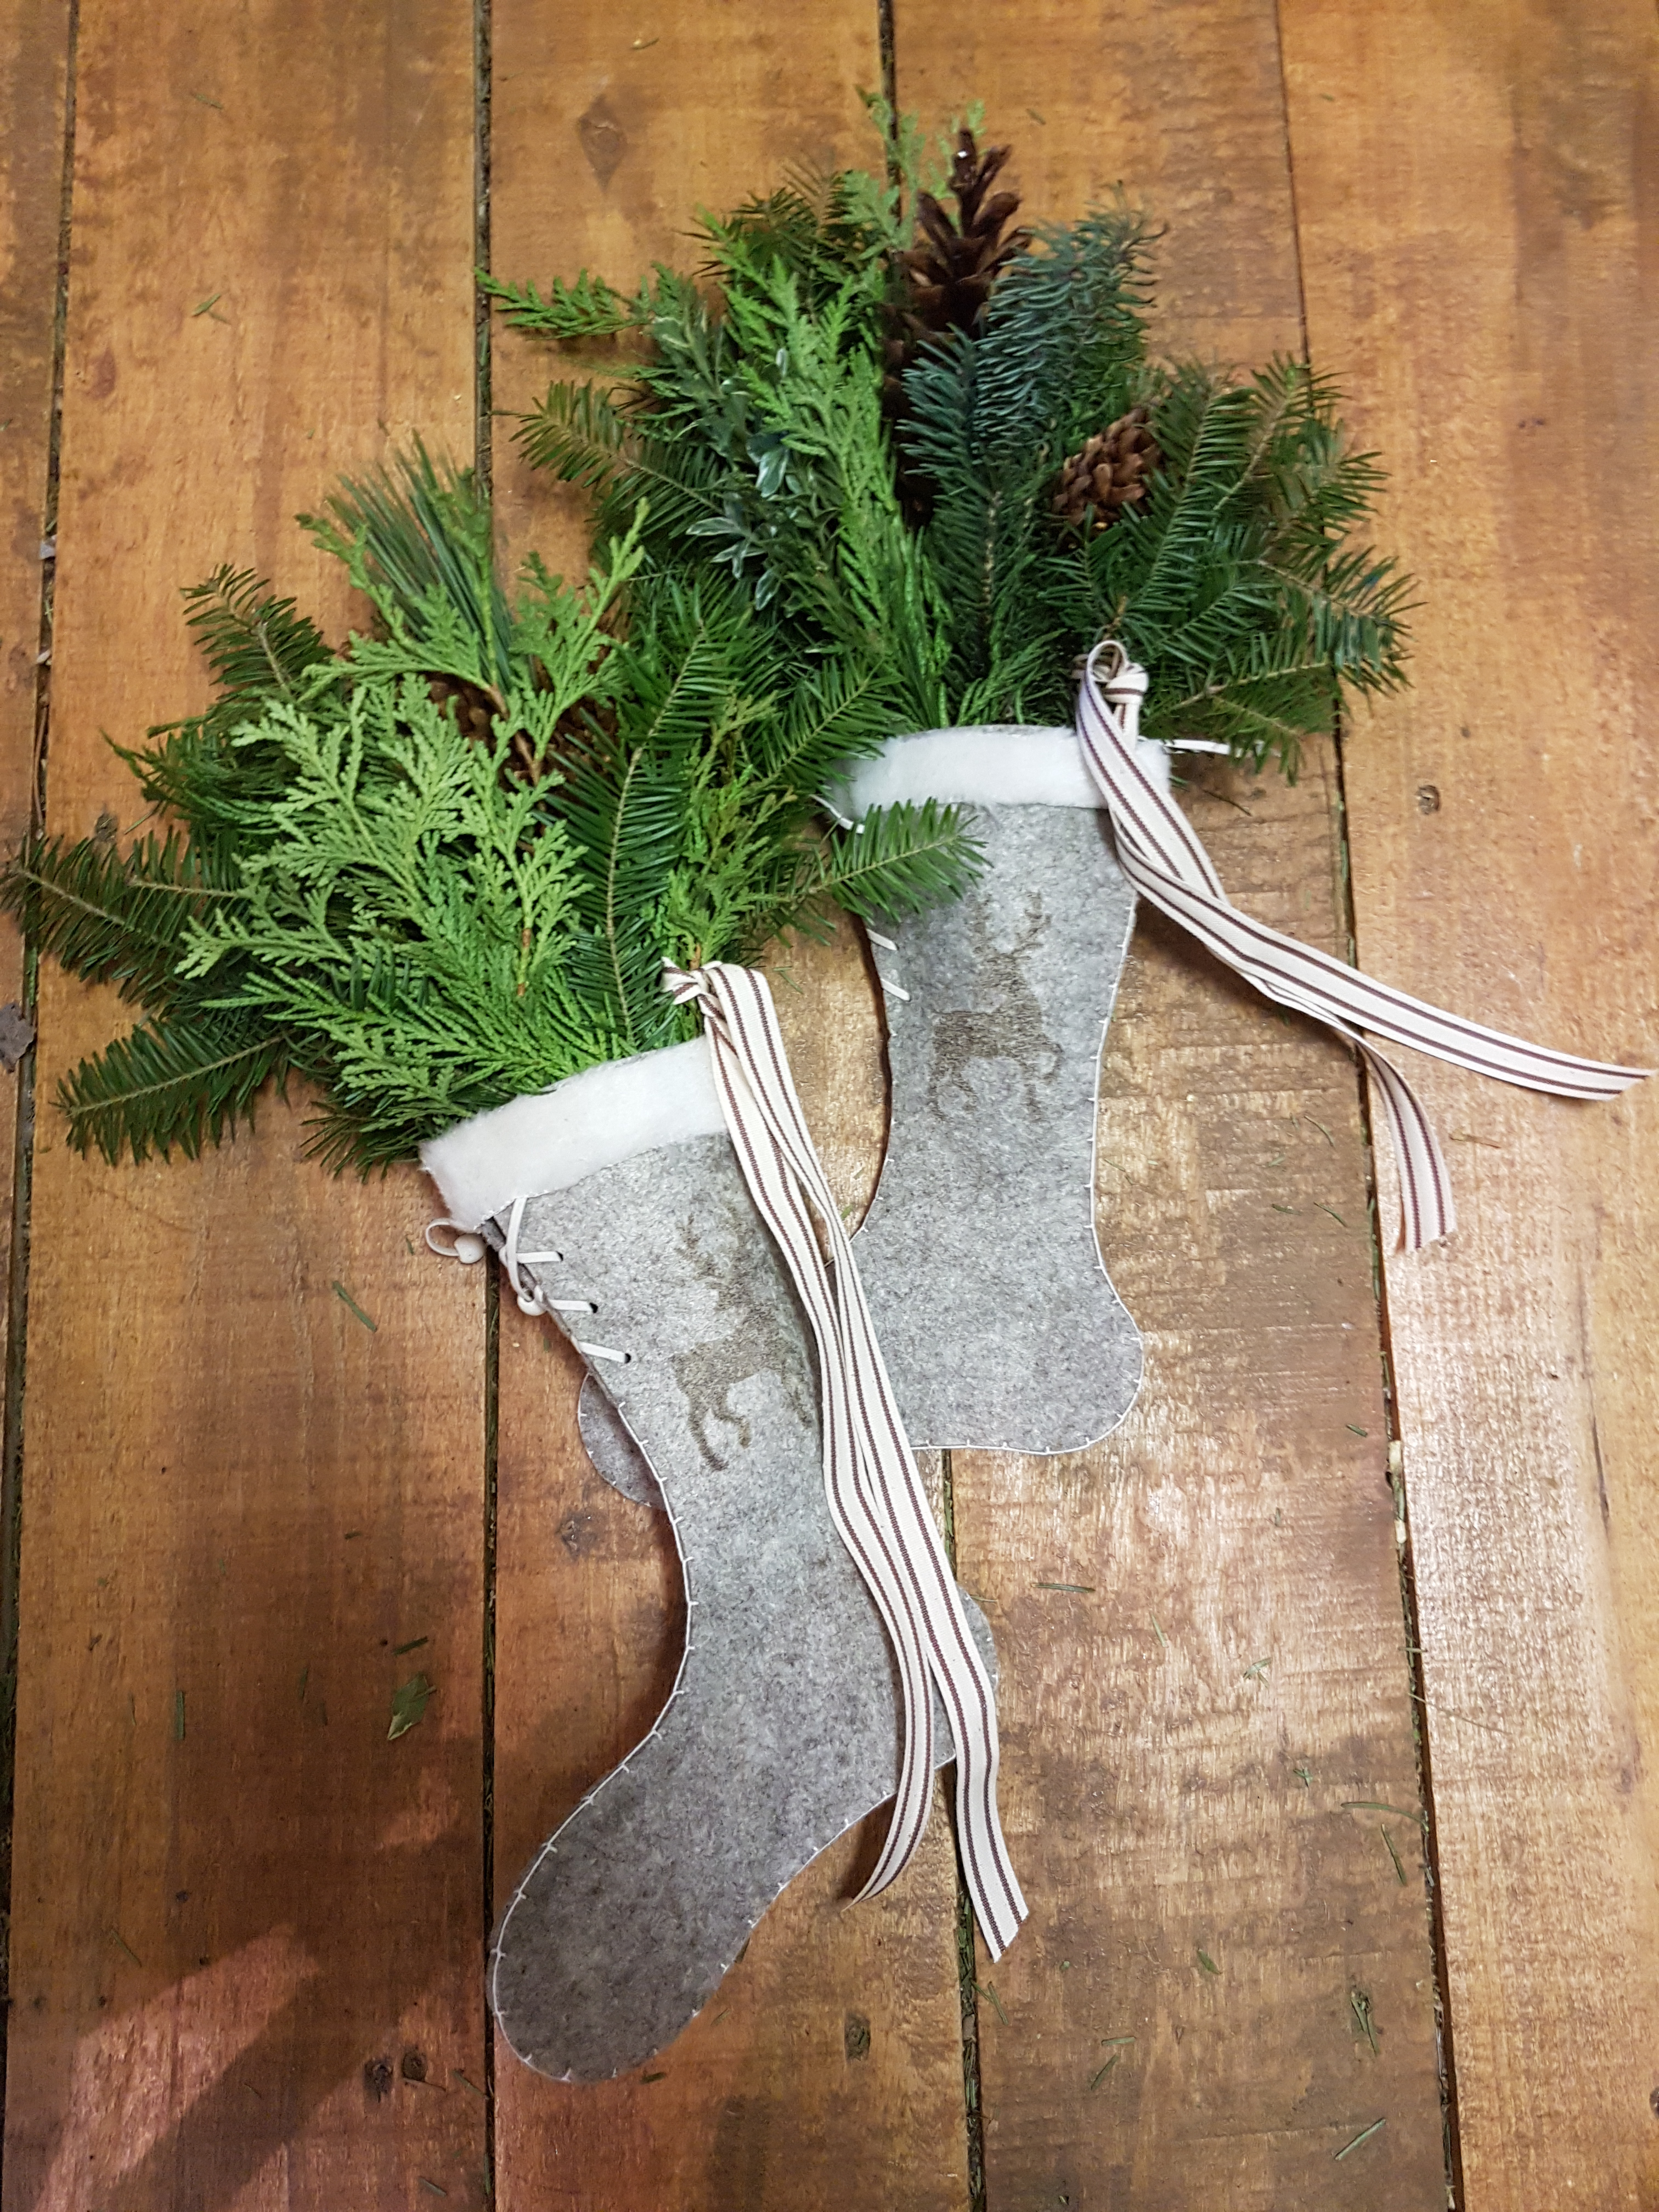 Felt stocking ( medium size) with Fresh or Faux evergreen boughs